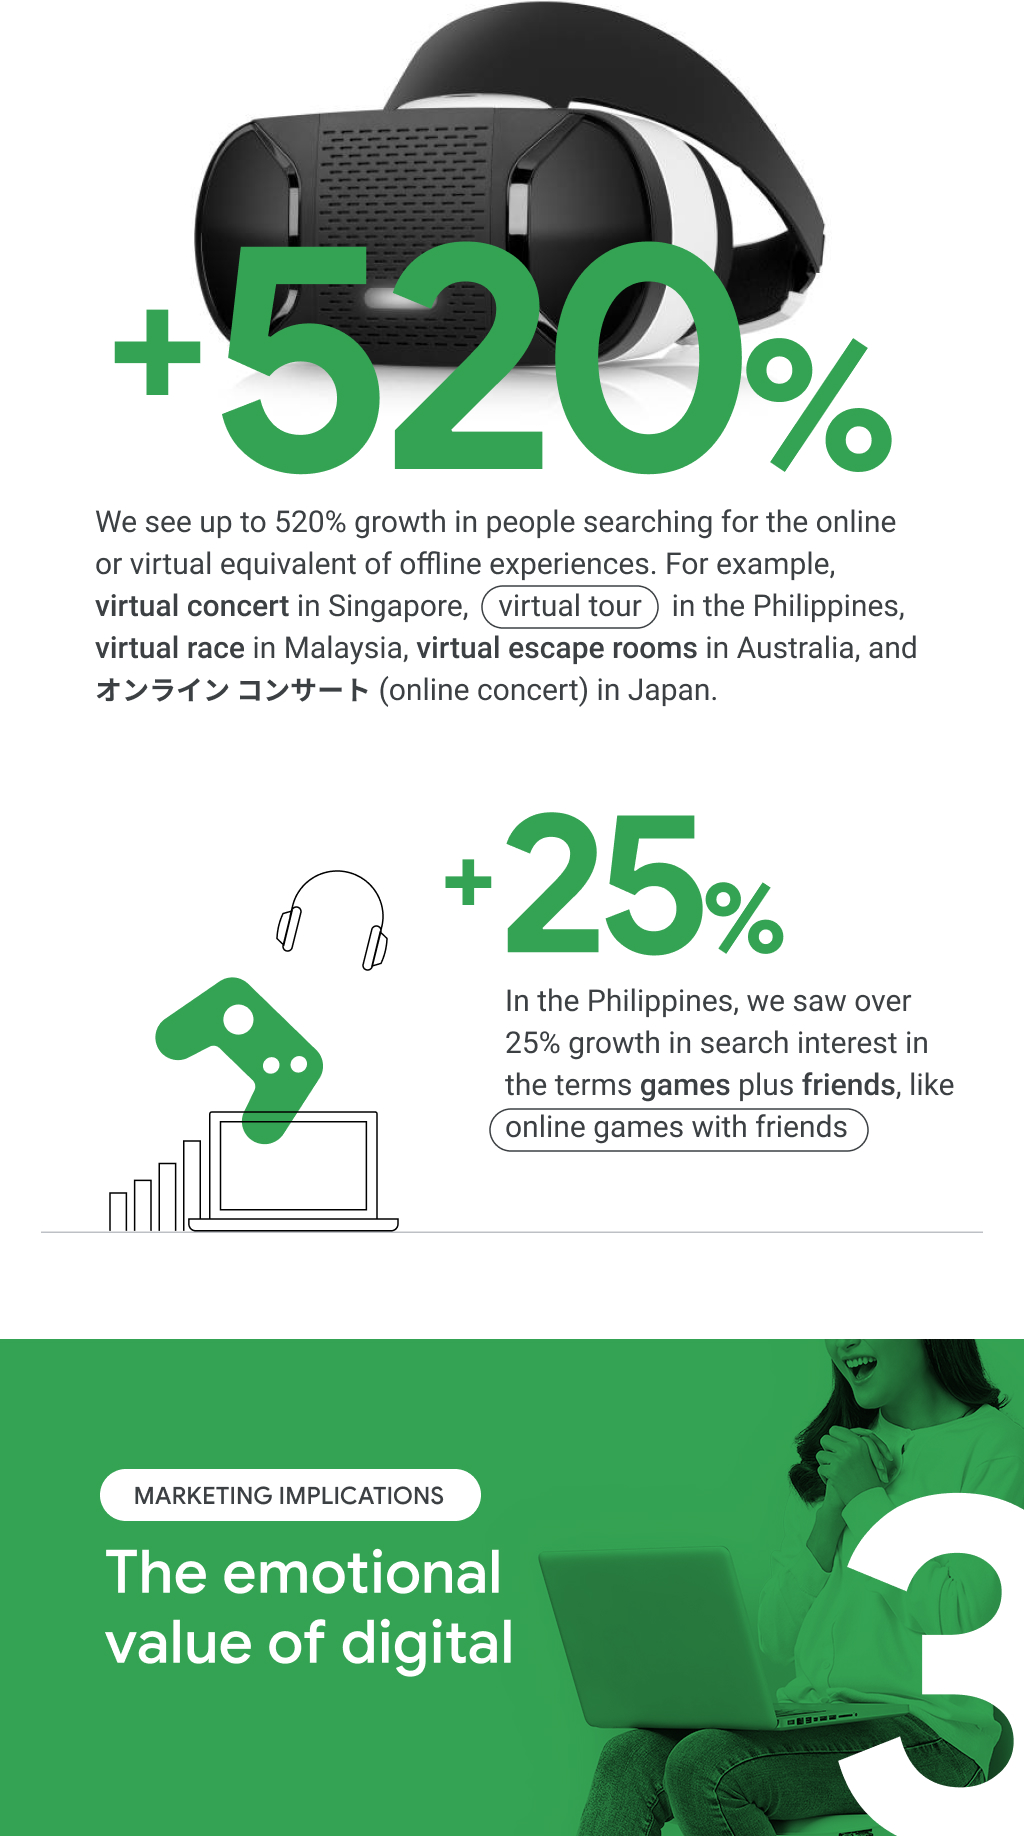 +520% searches for virtual equivalent of offline experiences, like “virtual tour” in the Philippines. >25% growth in search terms with “games” plus “friends”, like “online games with friends”. Marketing implications: The emotional value of digital.